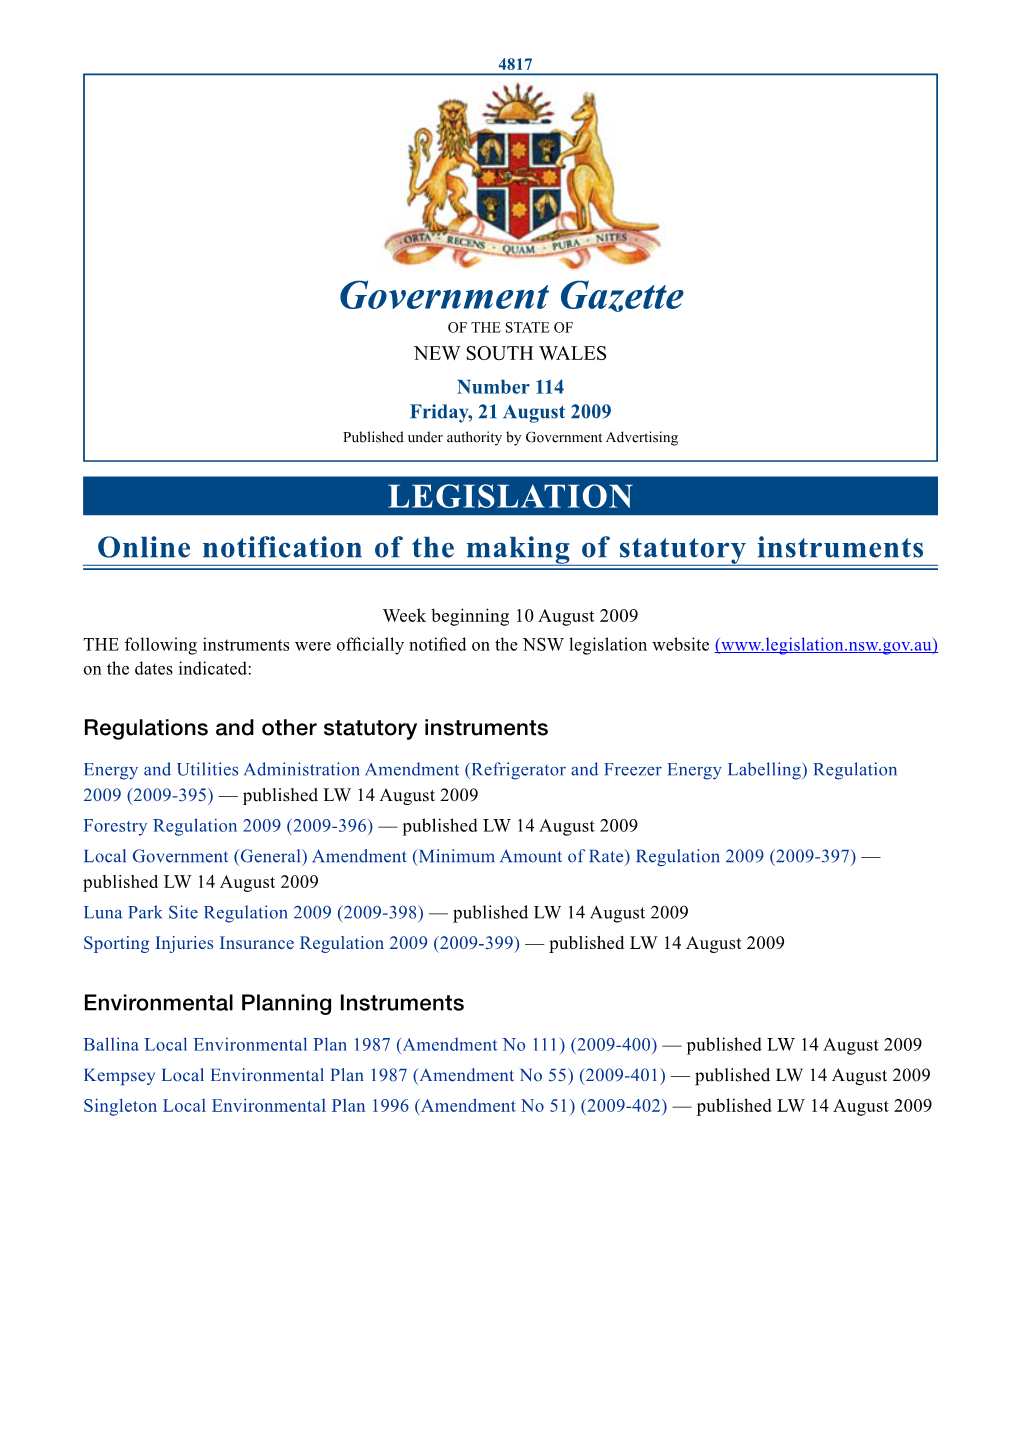 Government Gazette of the STATE of NEW SOUTH WALES Number 114 Friday, 21 August 2009 Published Under Authority by Government Advertising